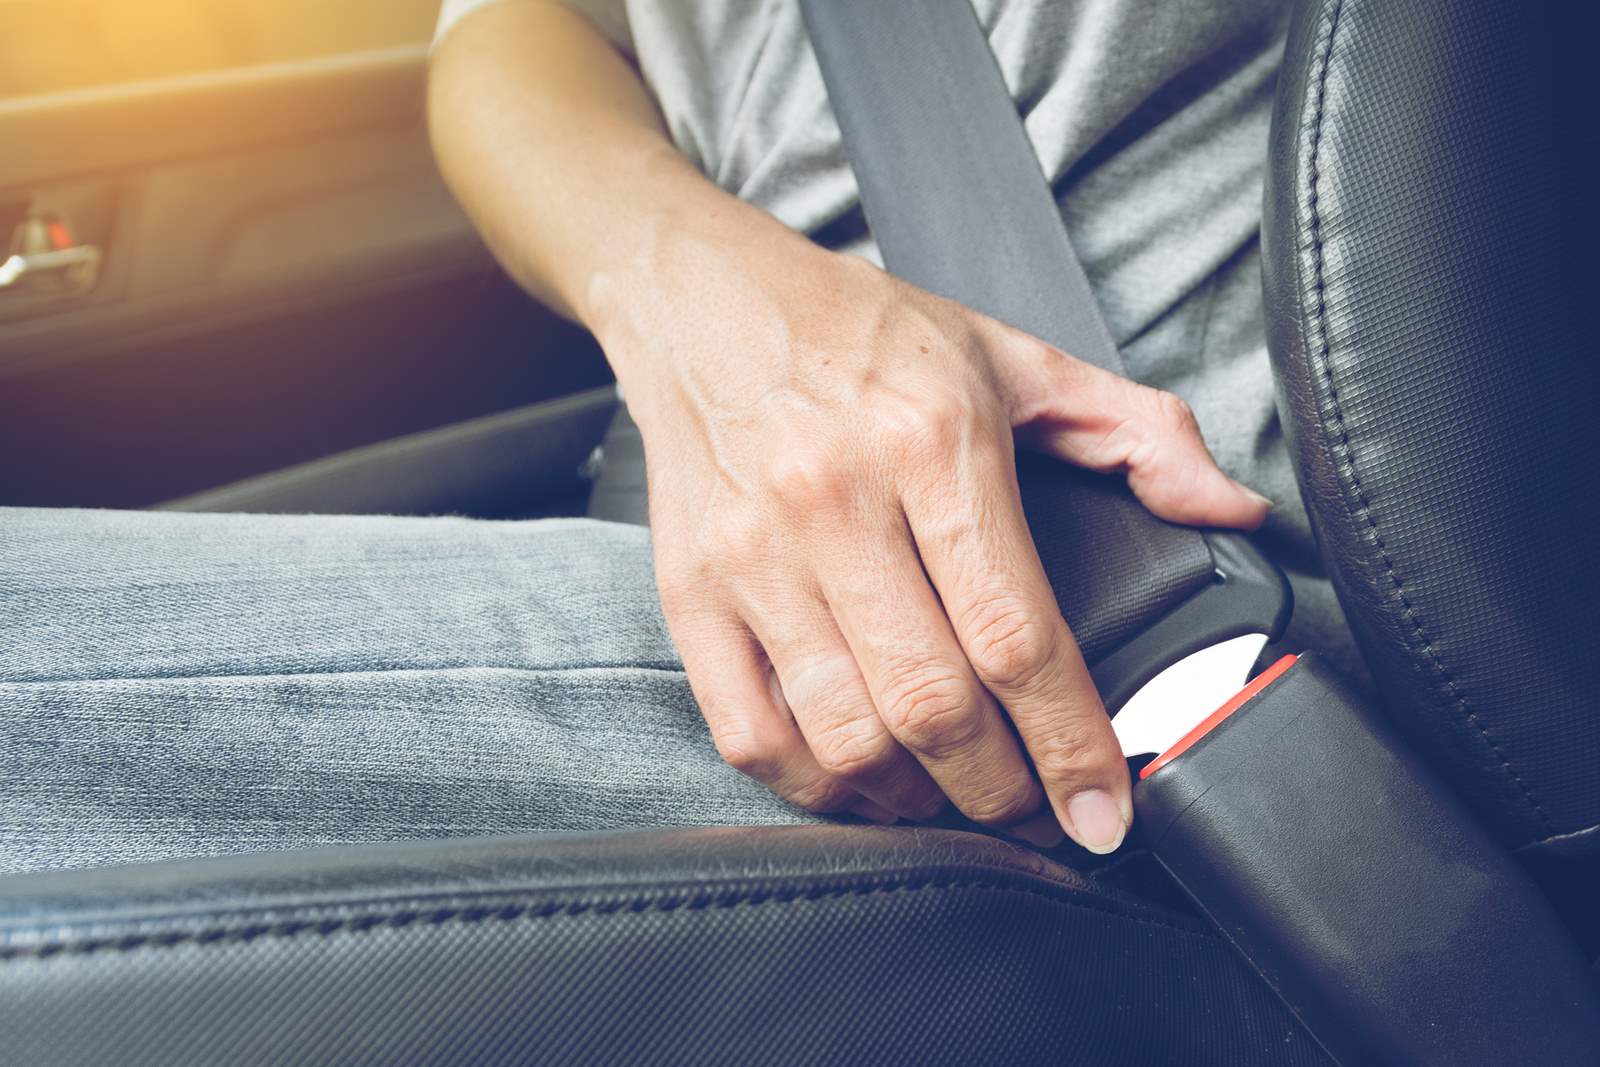 can you reset a seatbelt after an accident